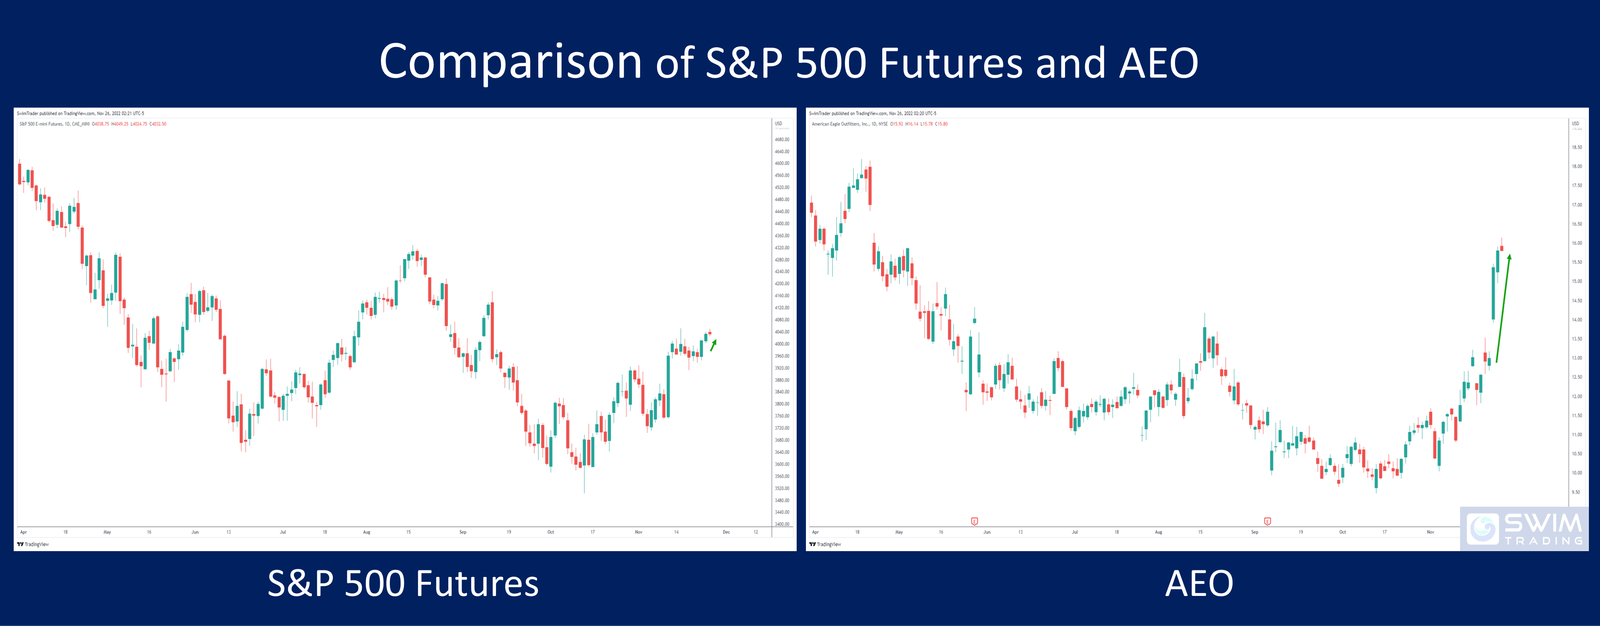 Compare S&P 500 futures and American Eagle Outfitters